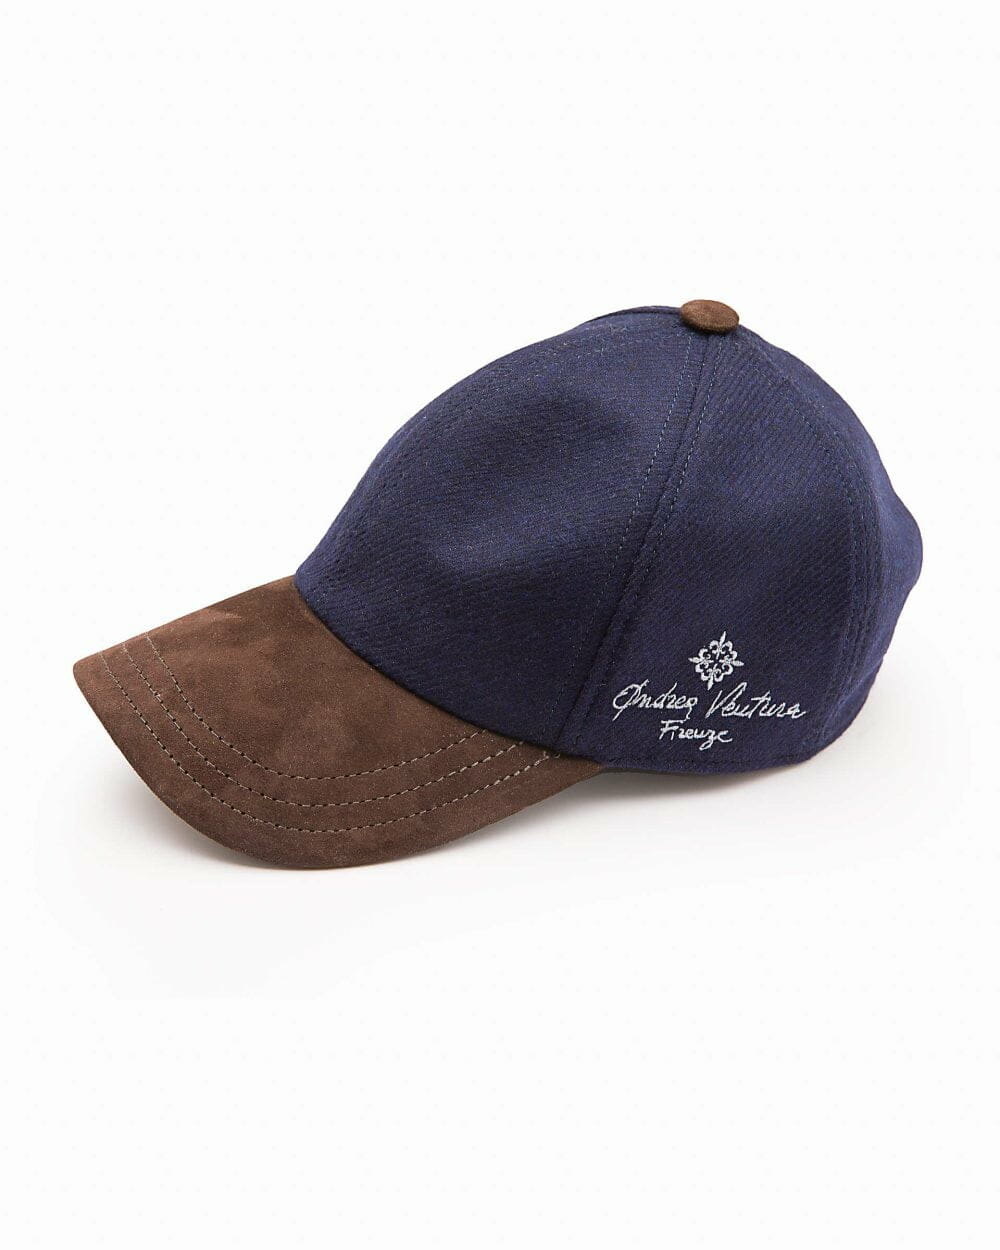 baseball-cap-cashmere-blue-on-plane-view-with-logo-2